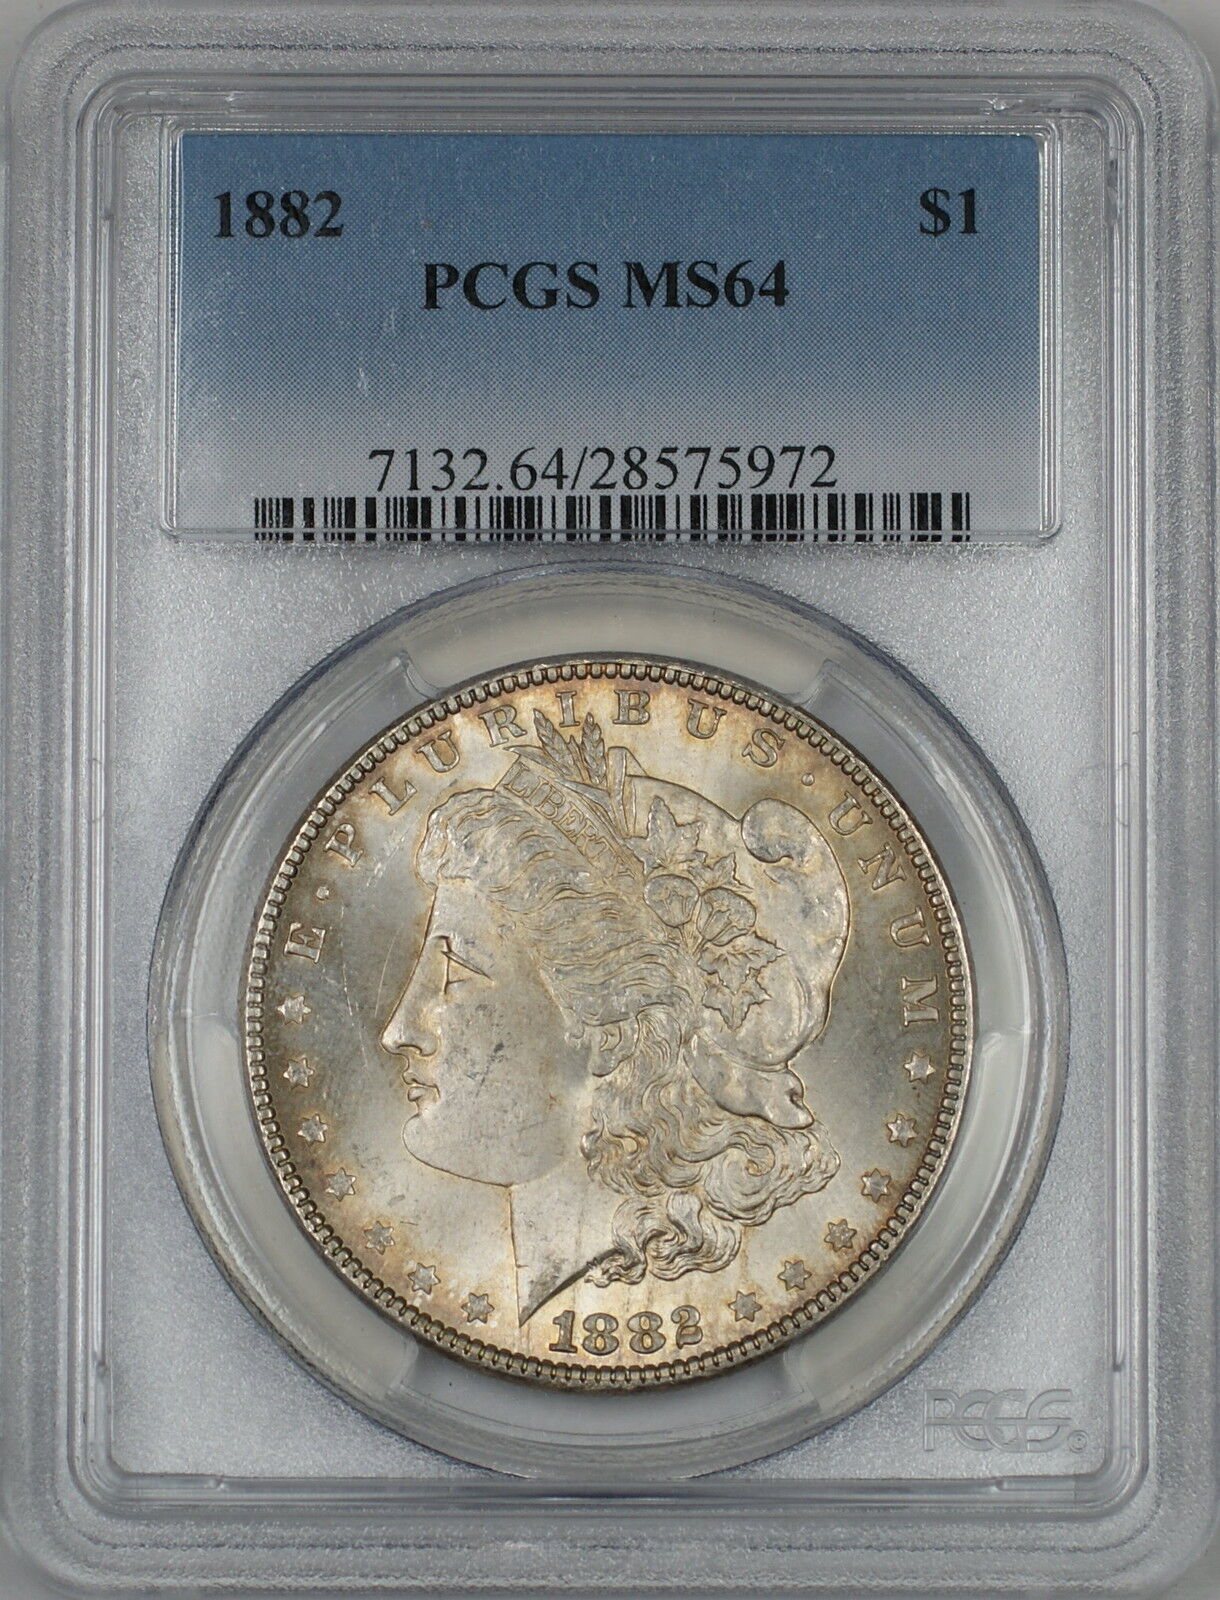 1882 Morgan Silver Dollar $1 Coin PCGS MS-64 *Nicely Toned* (Tb)